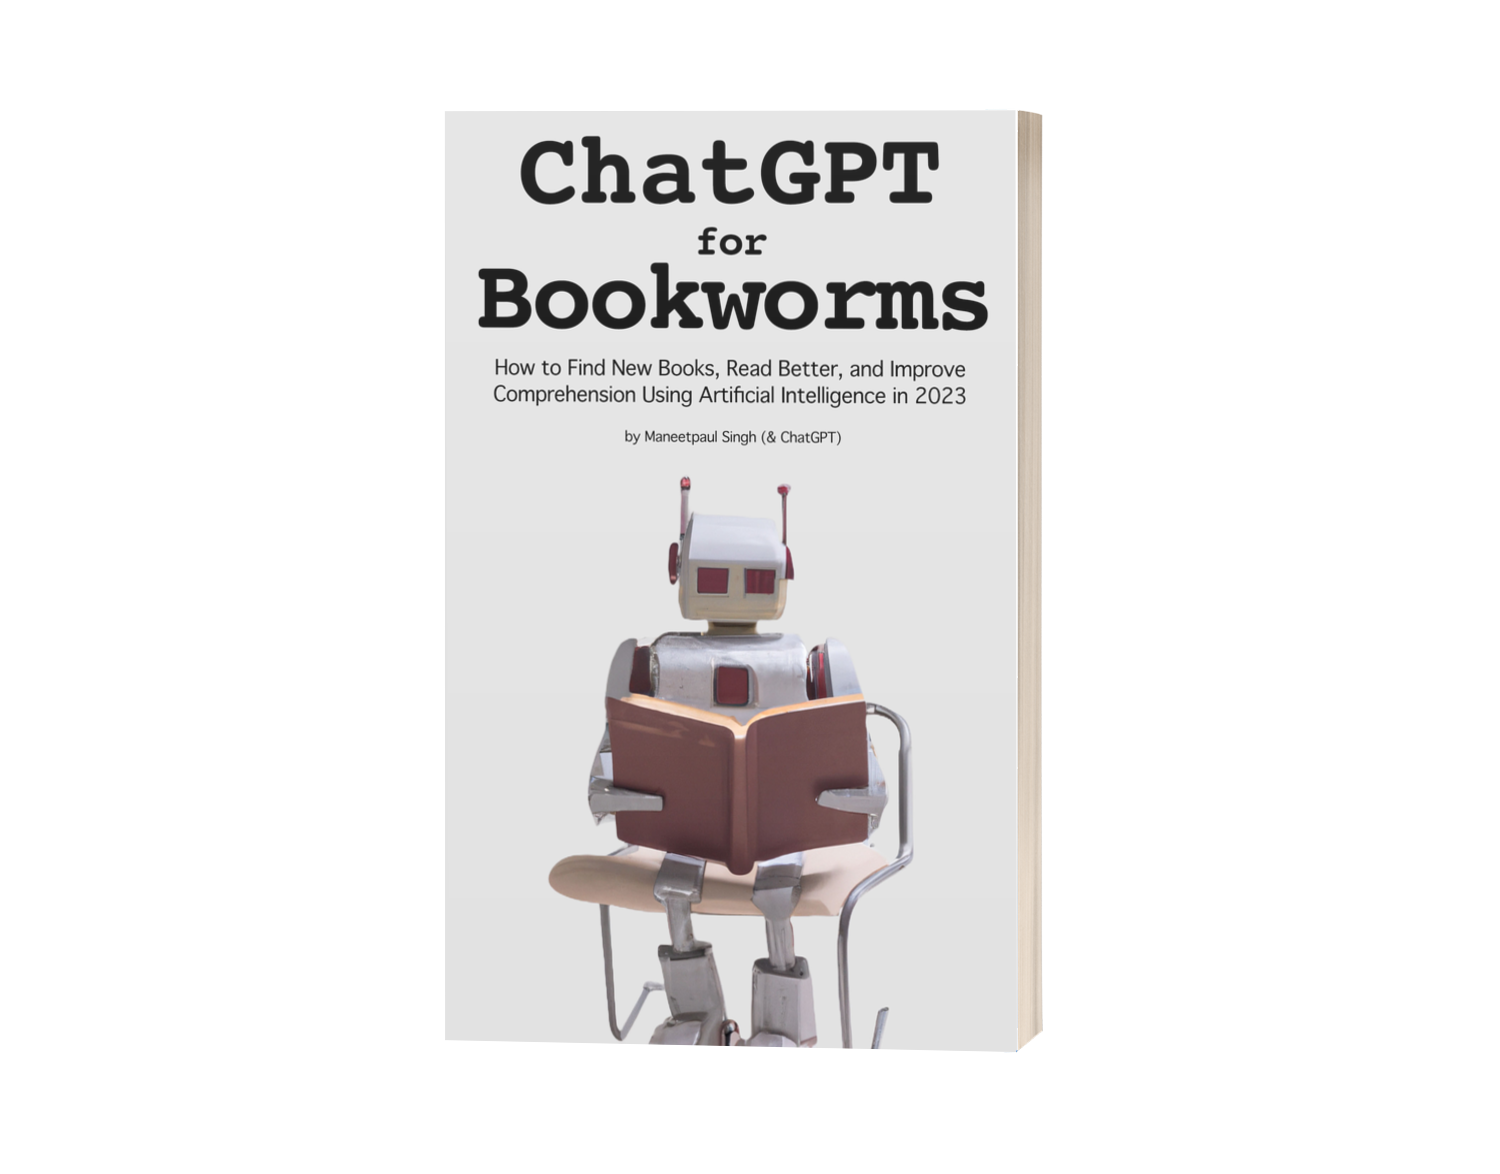 ChatGPT for Bookworms